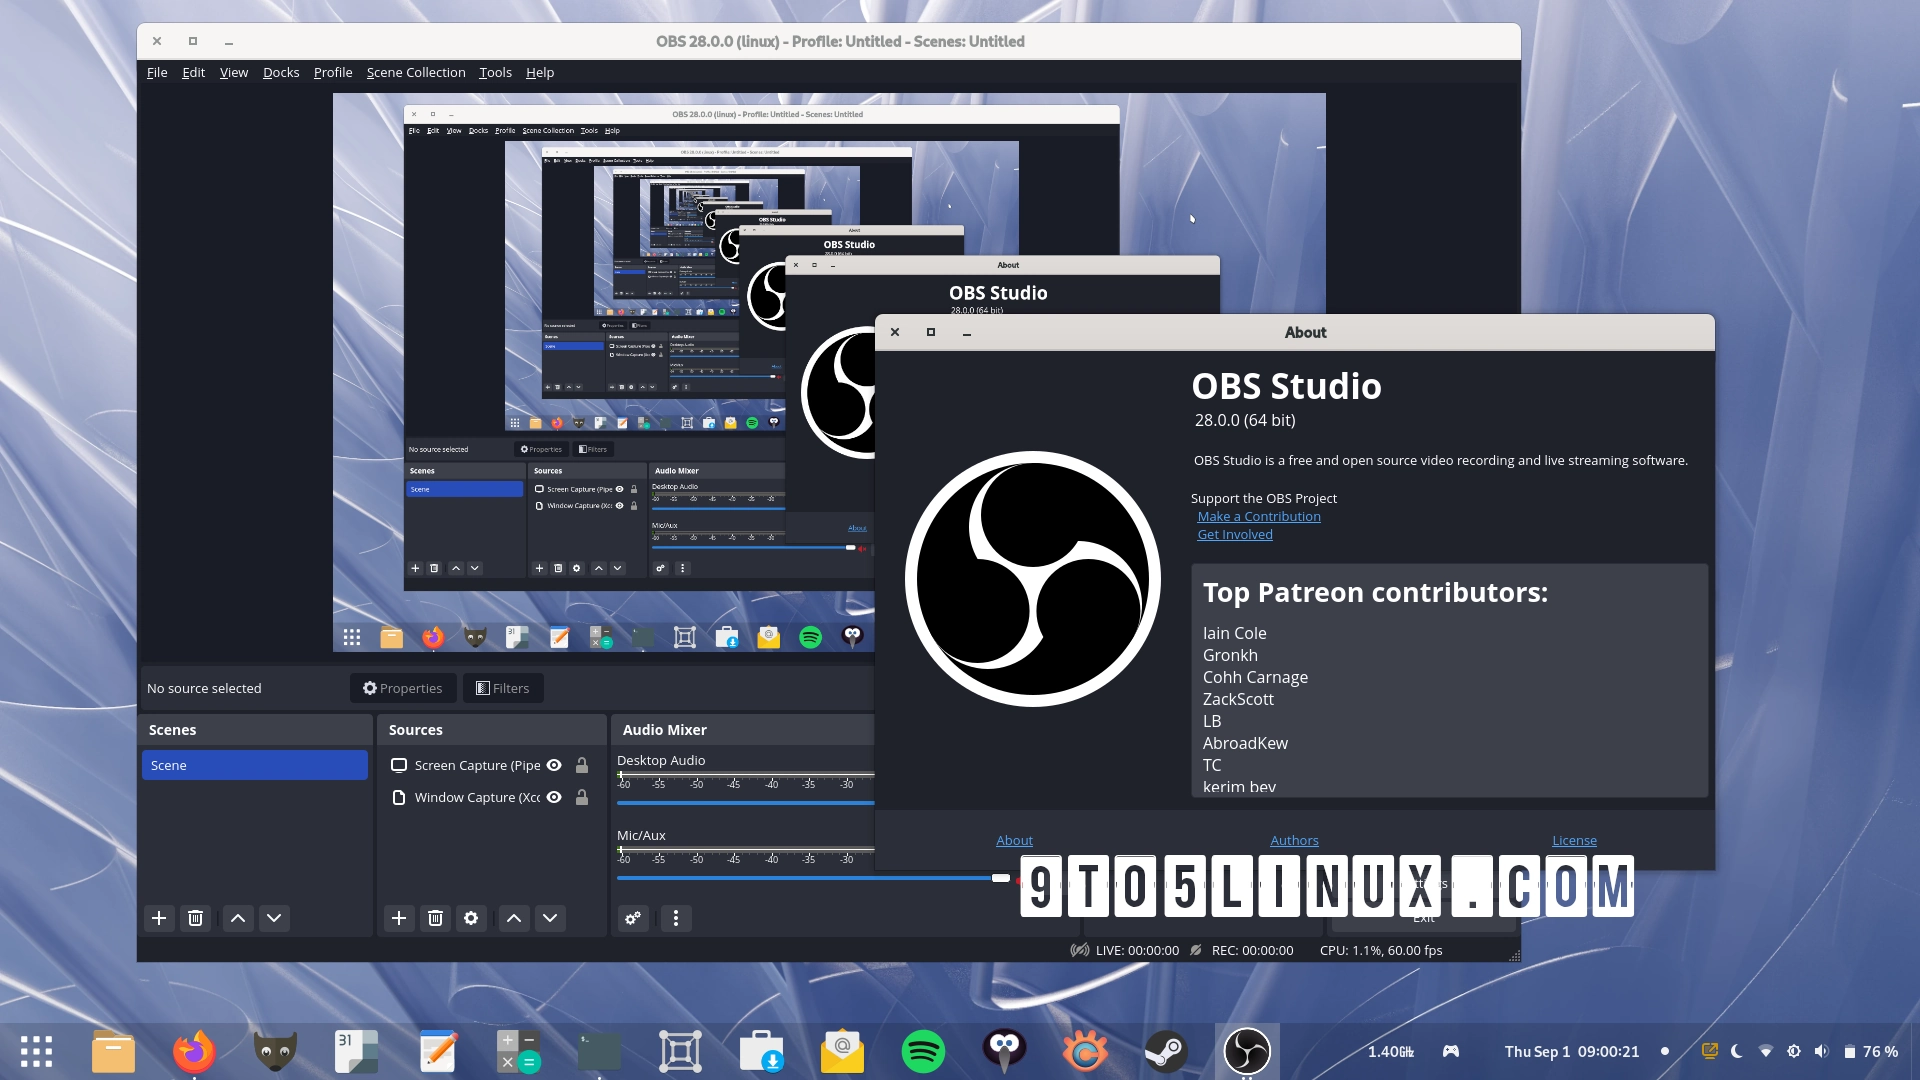 OBS Studio 28.0 Released with 10-Bit Color Support, HDR Video Encoding, and Qt 6 Port